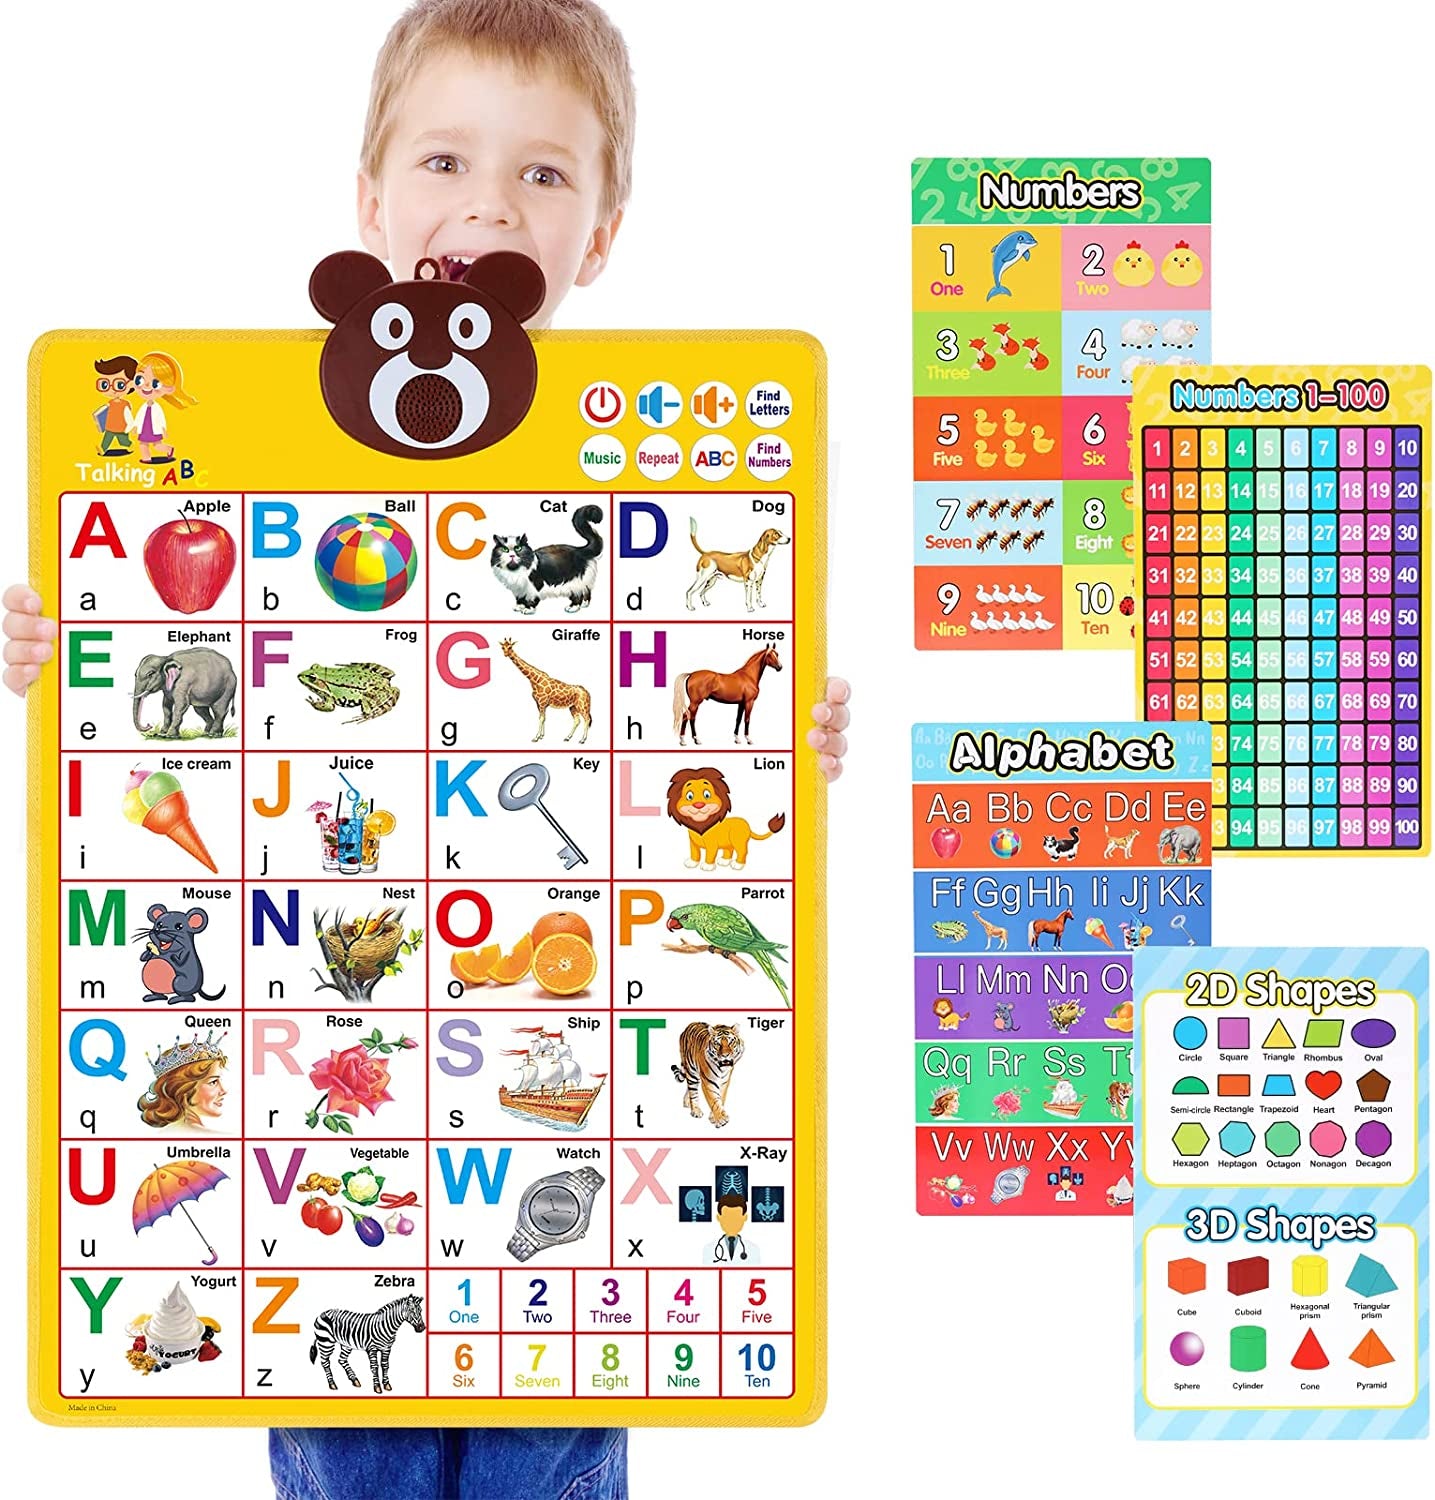 Tiikiy ABC Learning for Toddlers, Preschool Educational Learning Toys Electronic Talking Letters & Numbers & Music with 8 Learning Cards Interactive Alphabet Poster Gifts for 3+ Year Olds Boys Girls